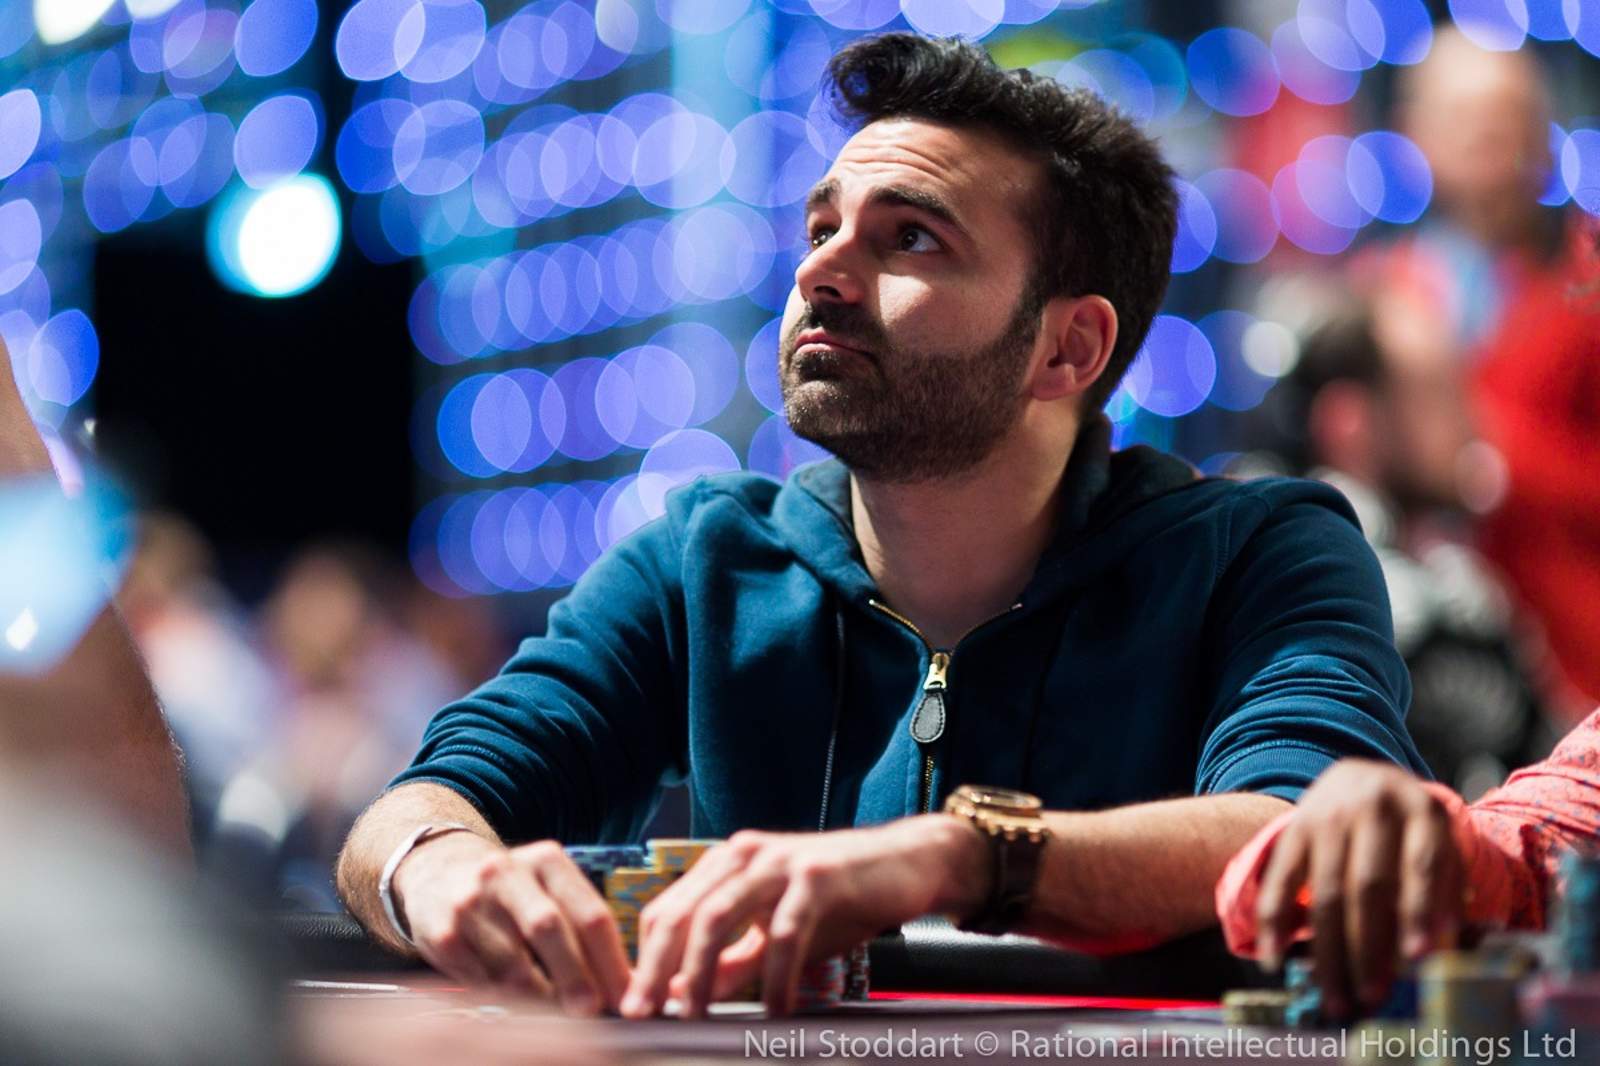 Jeffrey Hakim Bags Lead in Monte Carlo Main Event Day 1